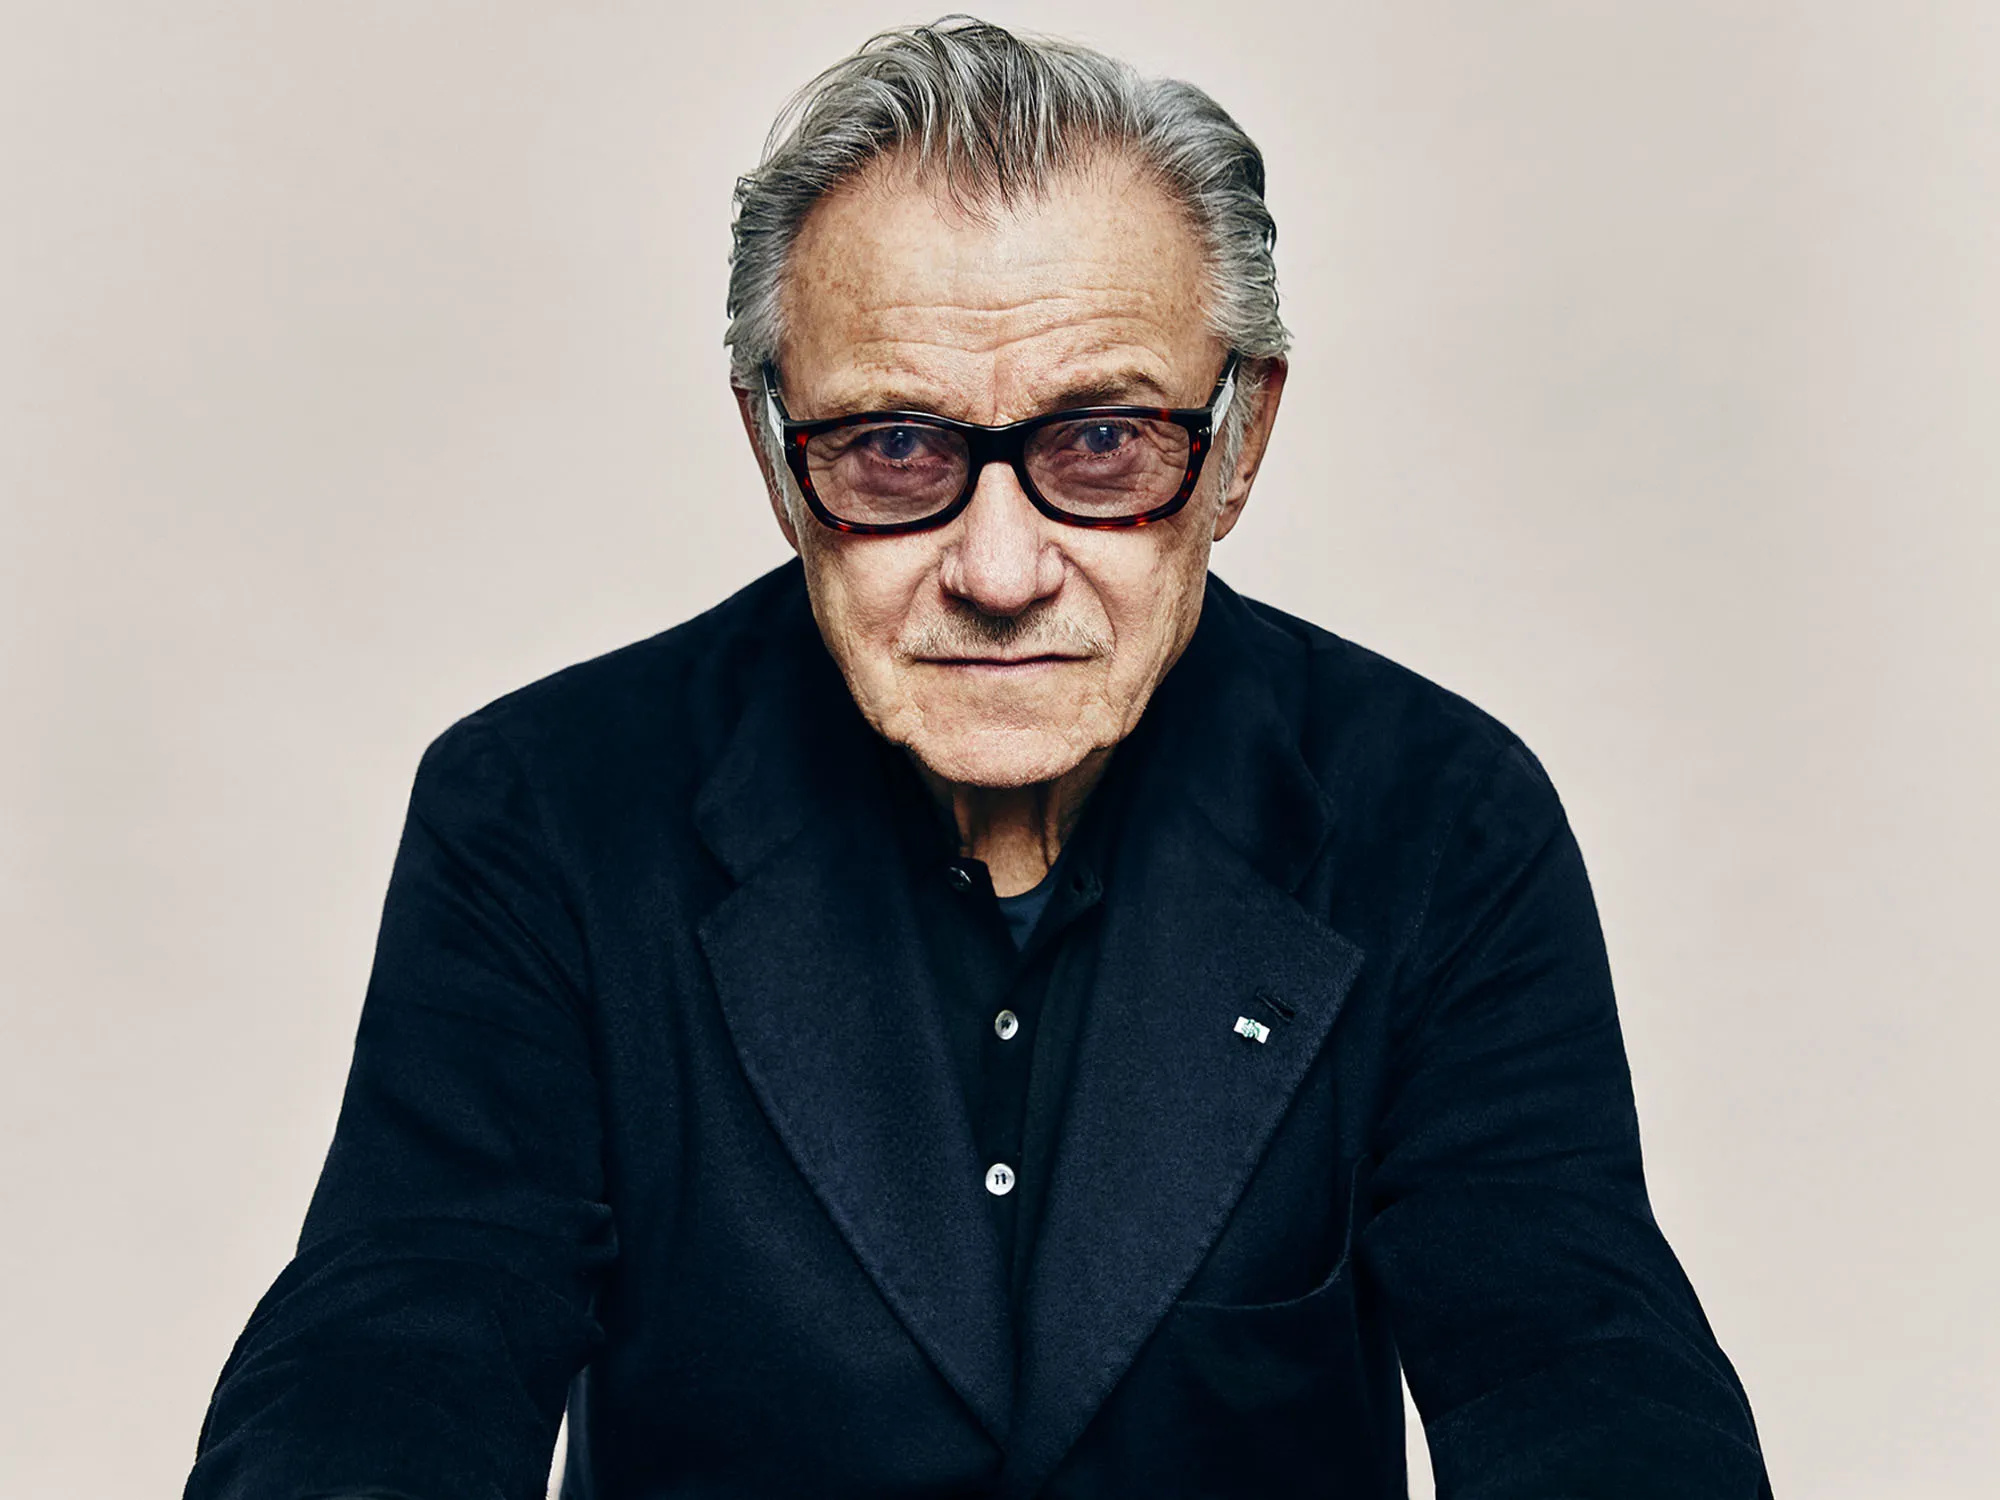 Harvey Keitel, What I've learned, Inspiring quotes, Life experiences, 2000x1500 HD Desktop